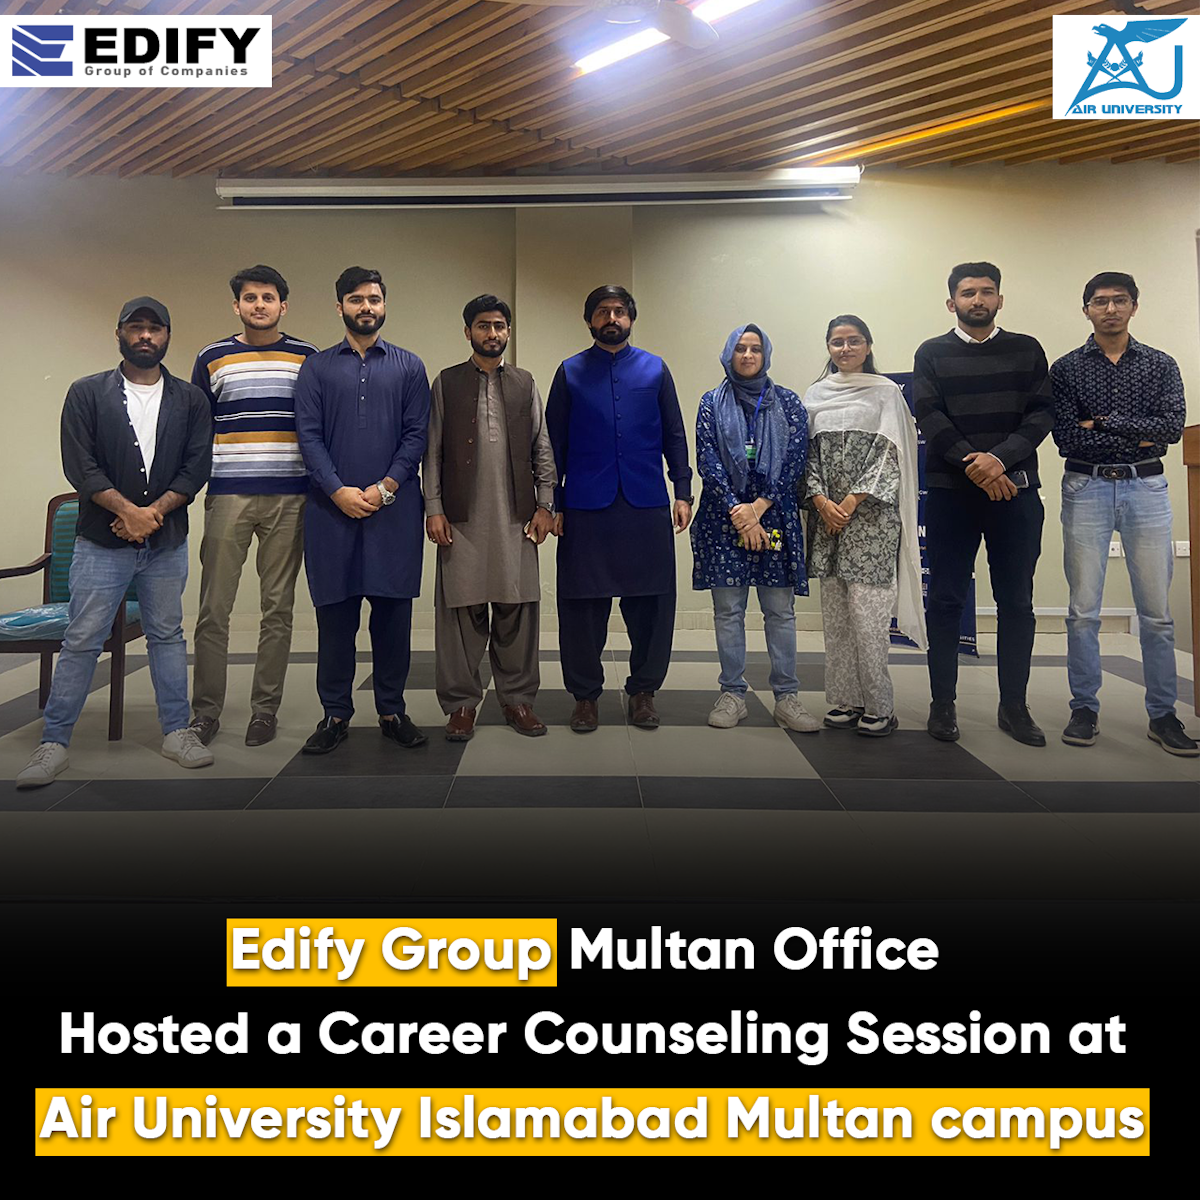 Edify Group Multan Office organized a career counselling session at the Air University Islamabad Multan Campus.